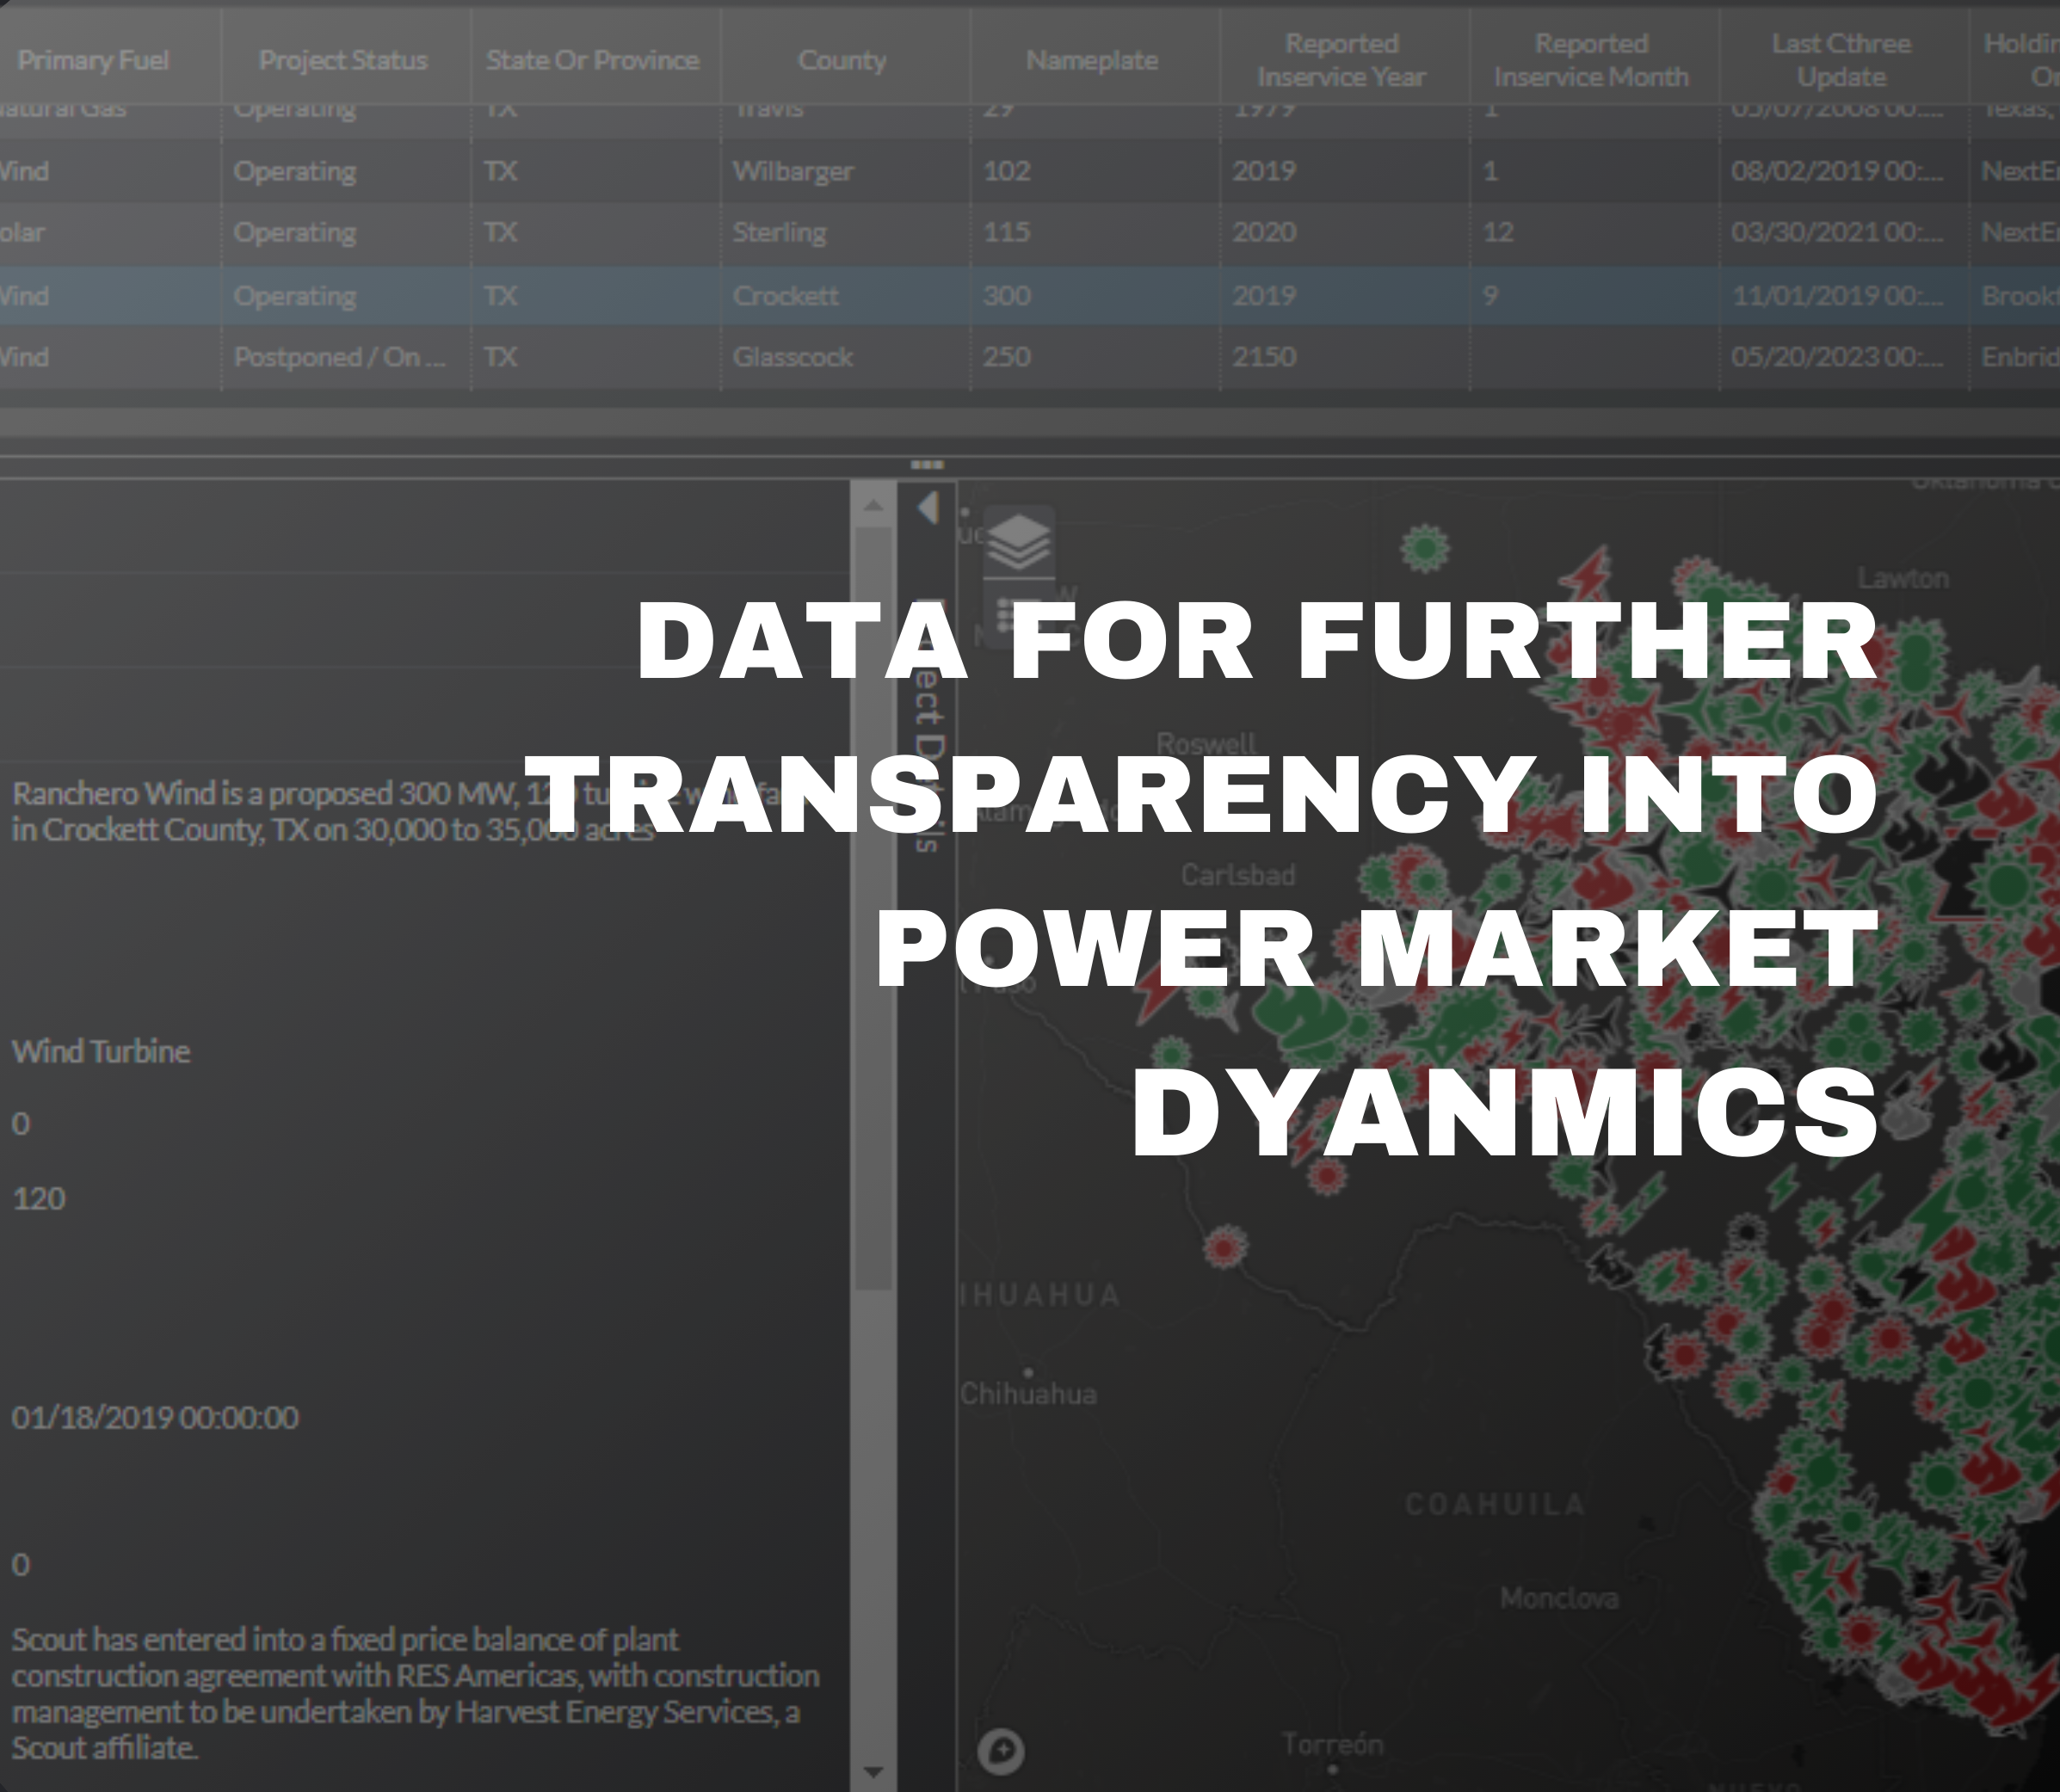 DATA FOR FURTHER TRANSPARENCY INTO POWER MARKET DYANMICS